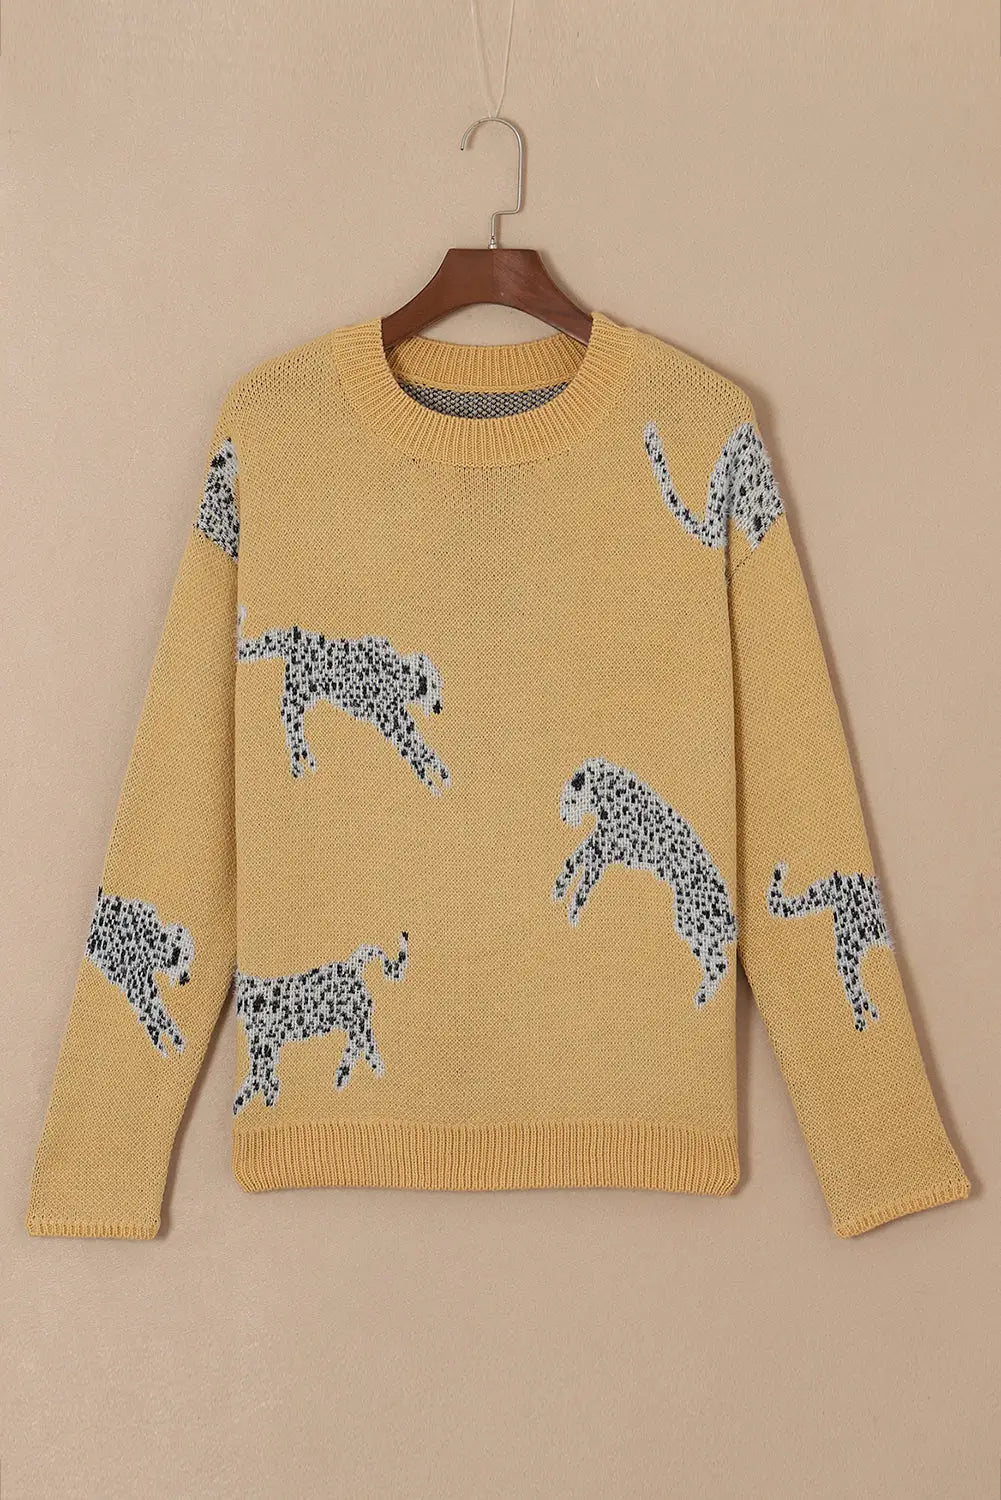 Camel fuzzy cheetah accent round neck sweater - sweaters & cardigans